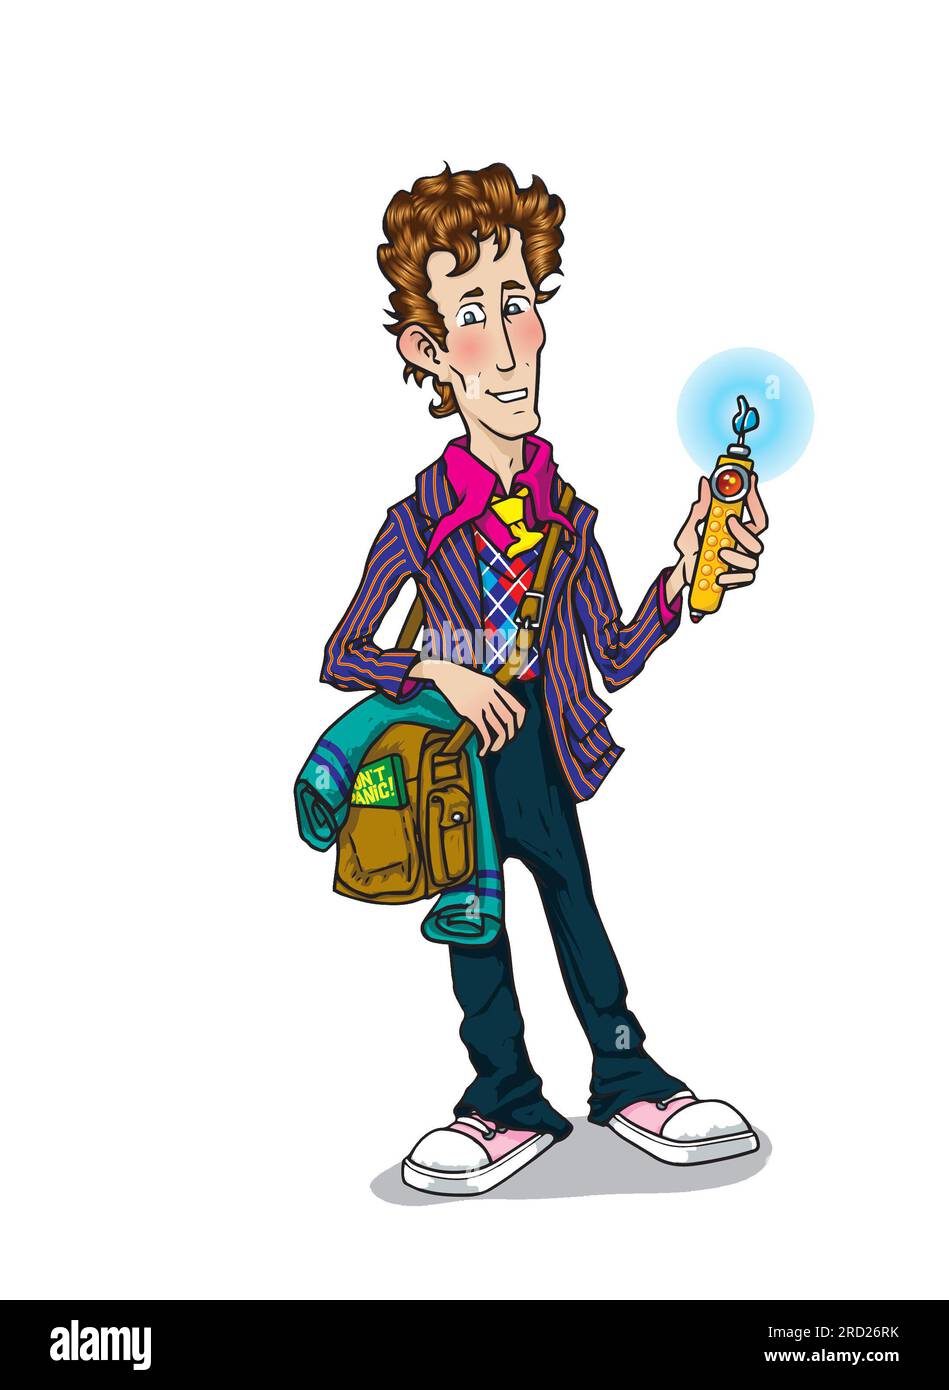 Illustration of man in striped blazer with satchel, towel, electronic thumb, copy of Hitchhiker's Guide to the Galaxy, Douglas Adams' Ford Prefect Stock Photo